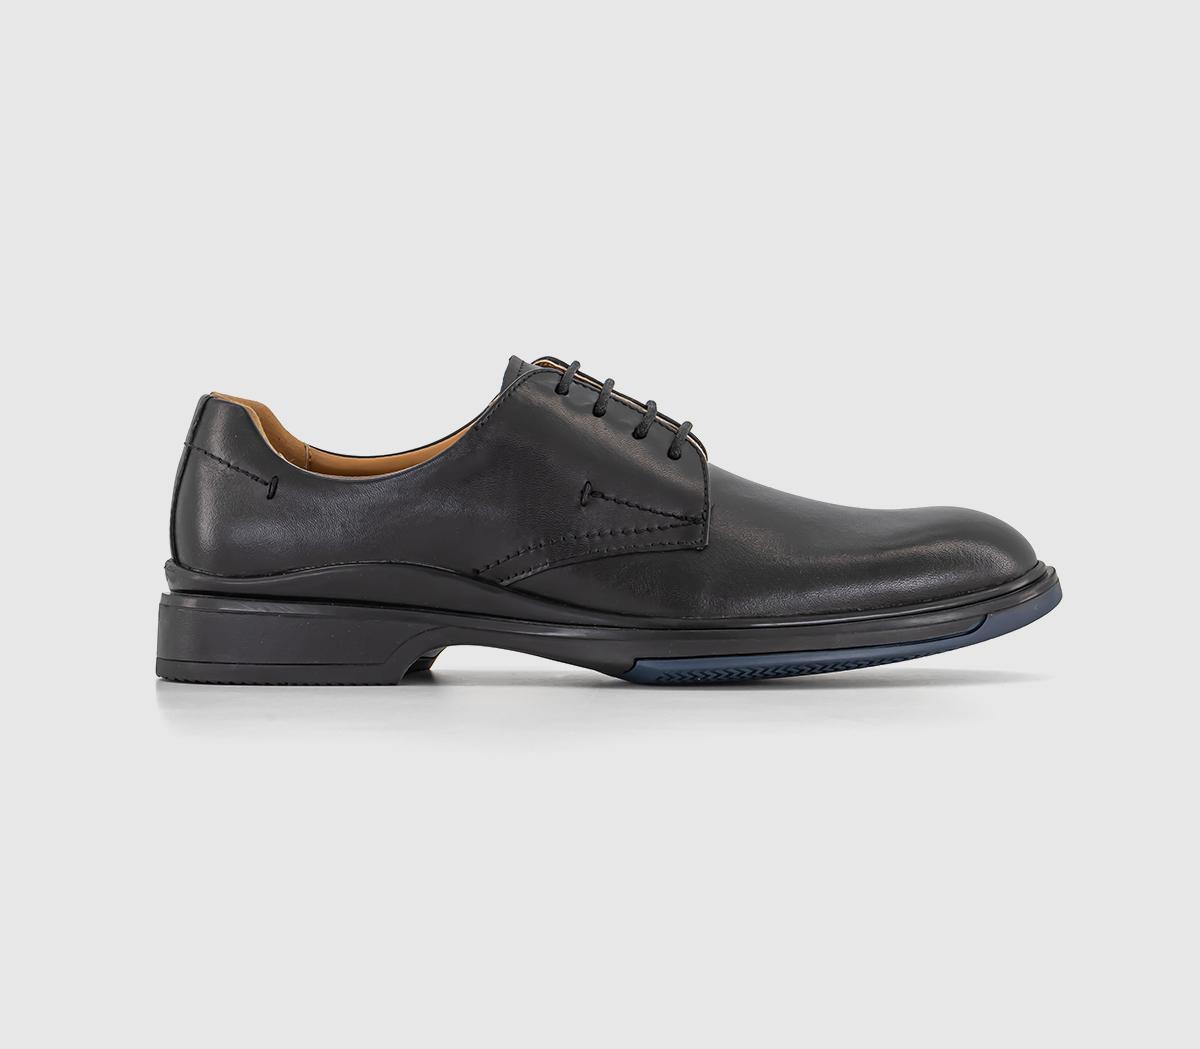 Montebello Moulded Sole 4 Eye Derby Shoes Black Leather